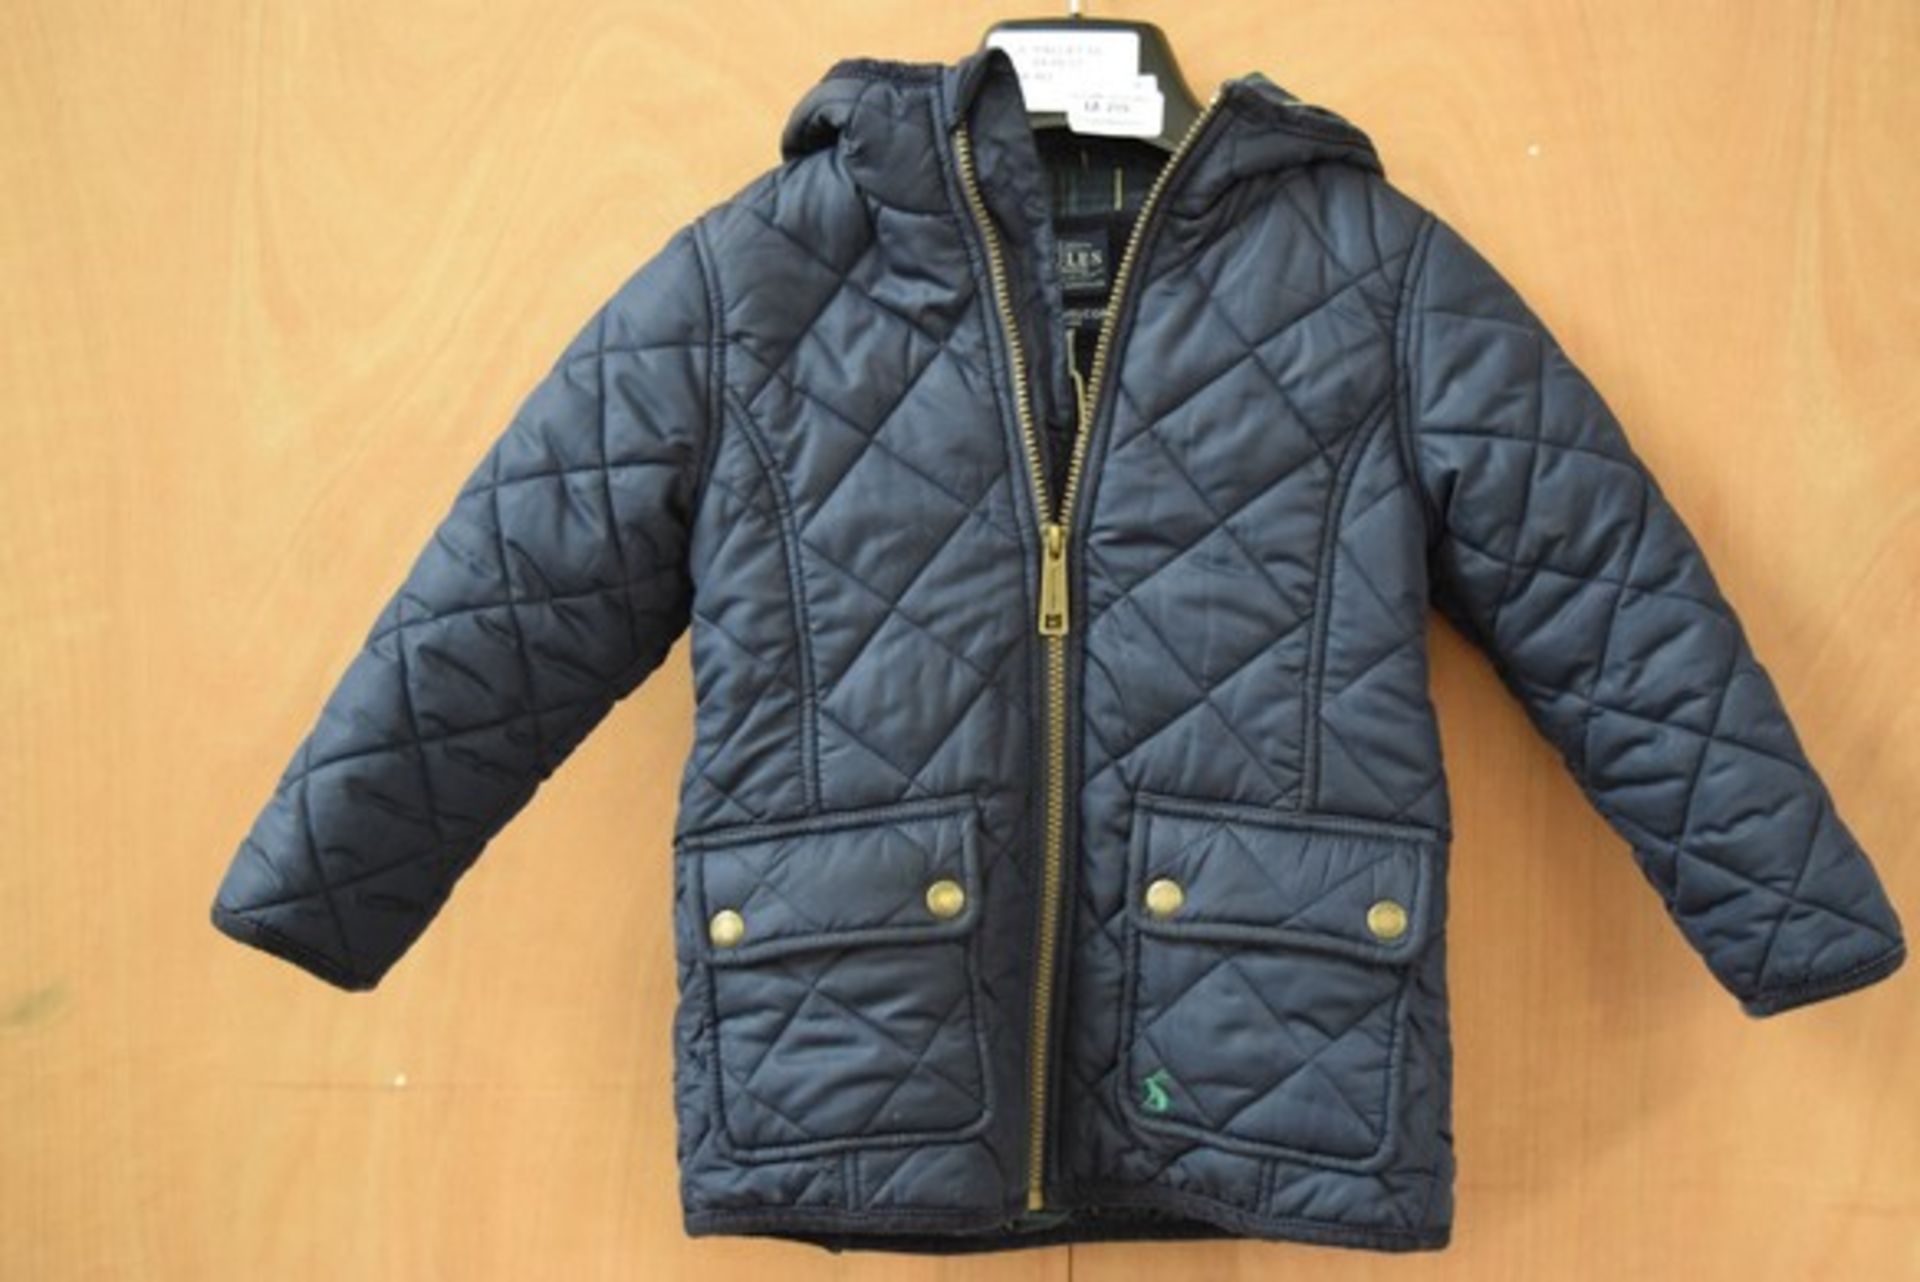 1 x JOULES CHILDREN'S PADDED COAT SIZE 3 YEARS RRP £30 04.08.17 *PLEASE NOTE THAT THE BID PRICE IS